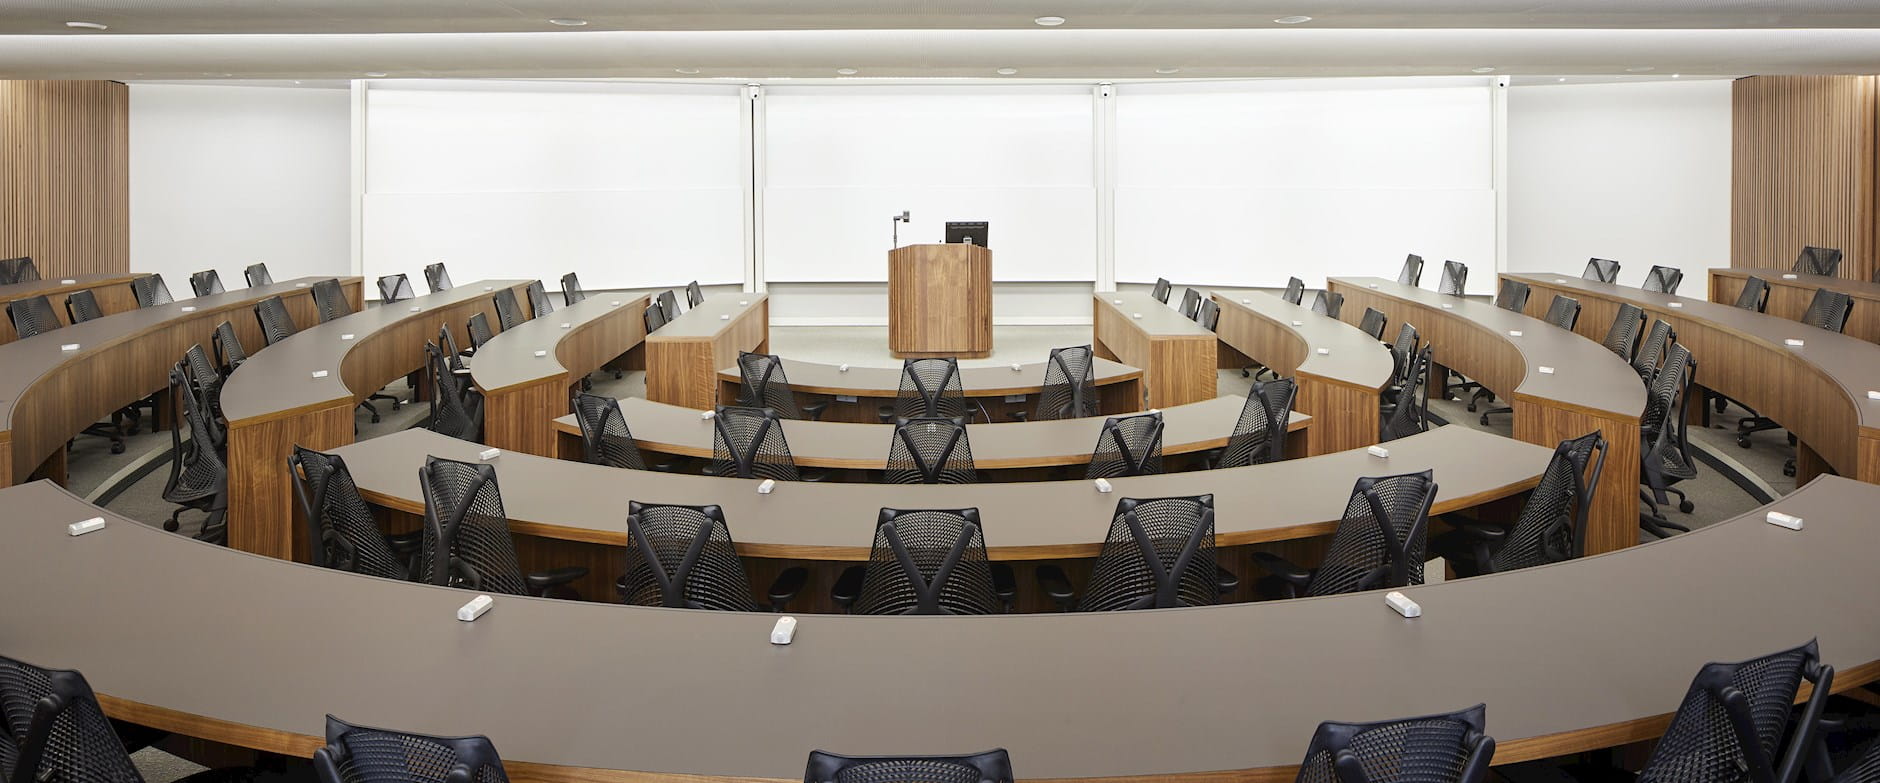 Large semi-circular conference hall with desks around a central podium